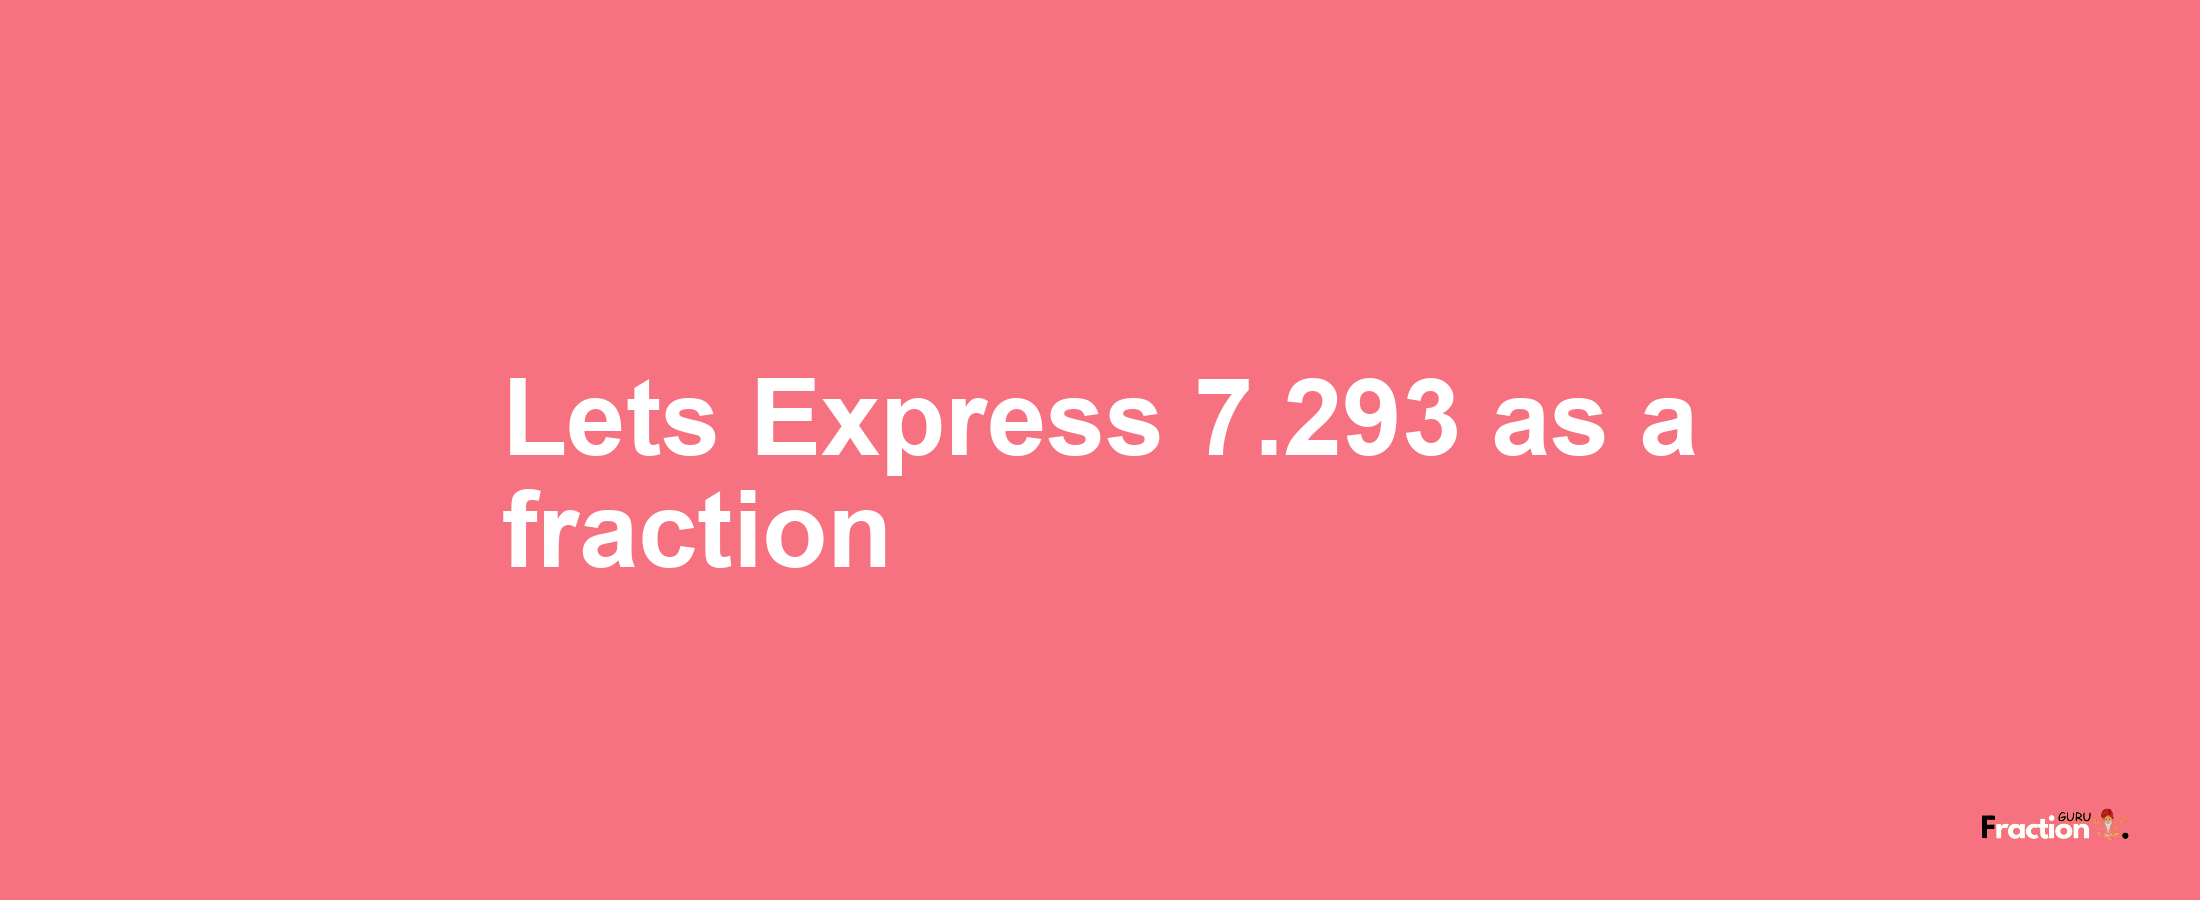 Lets Express 7.293 as afraction